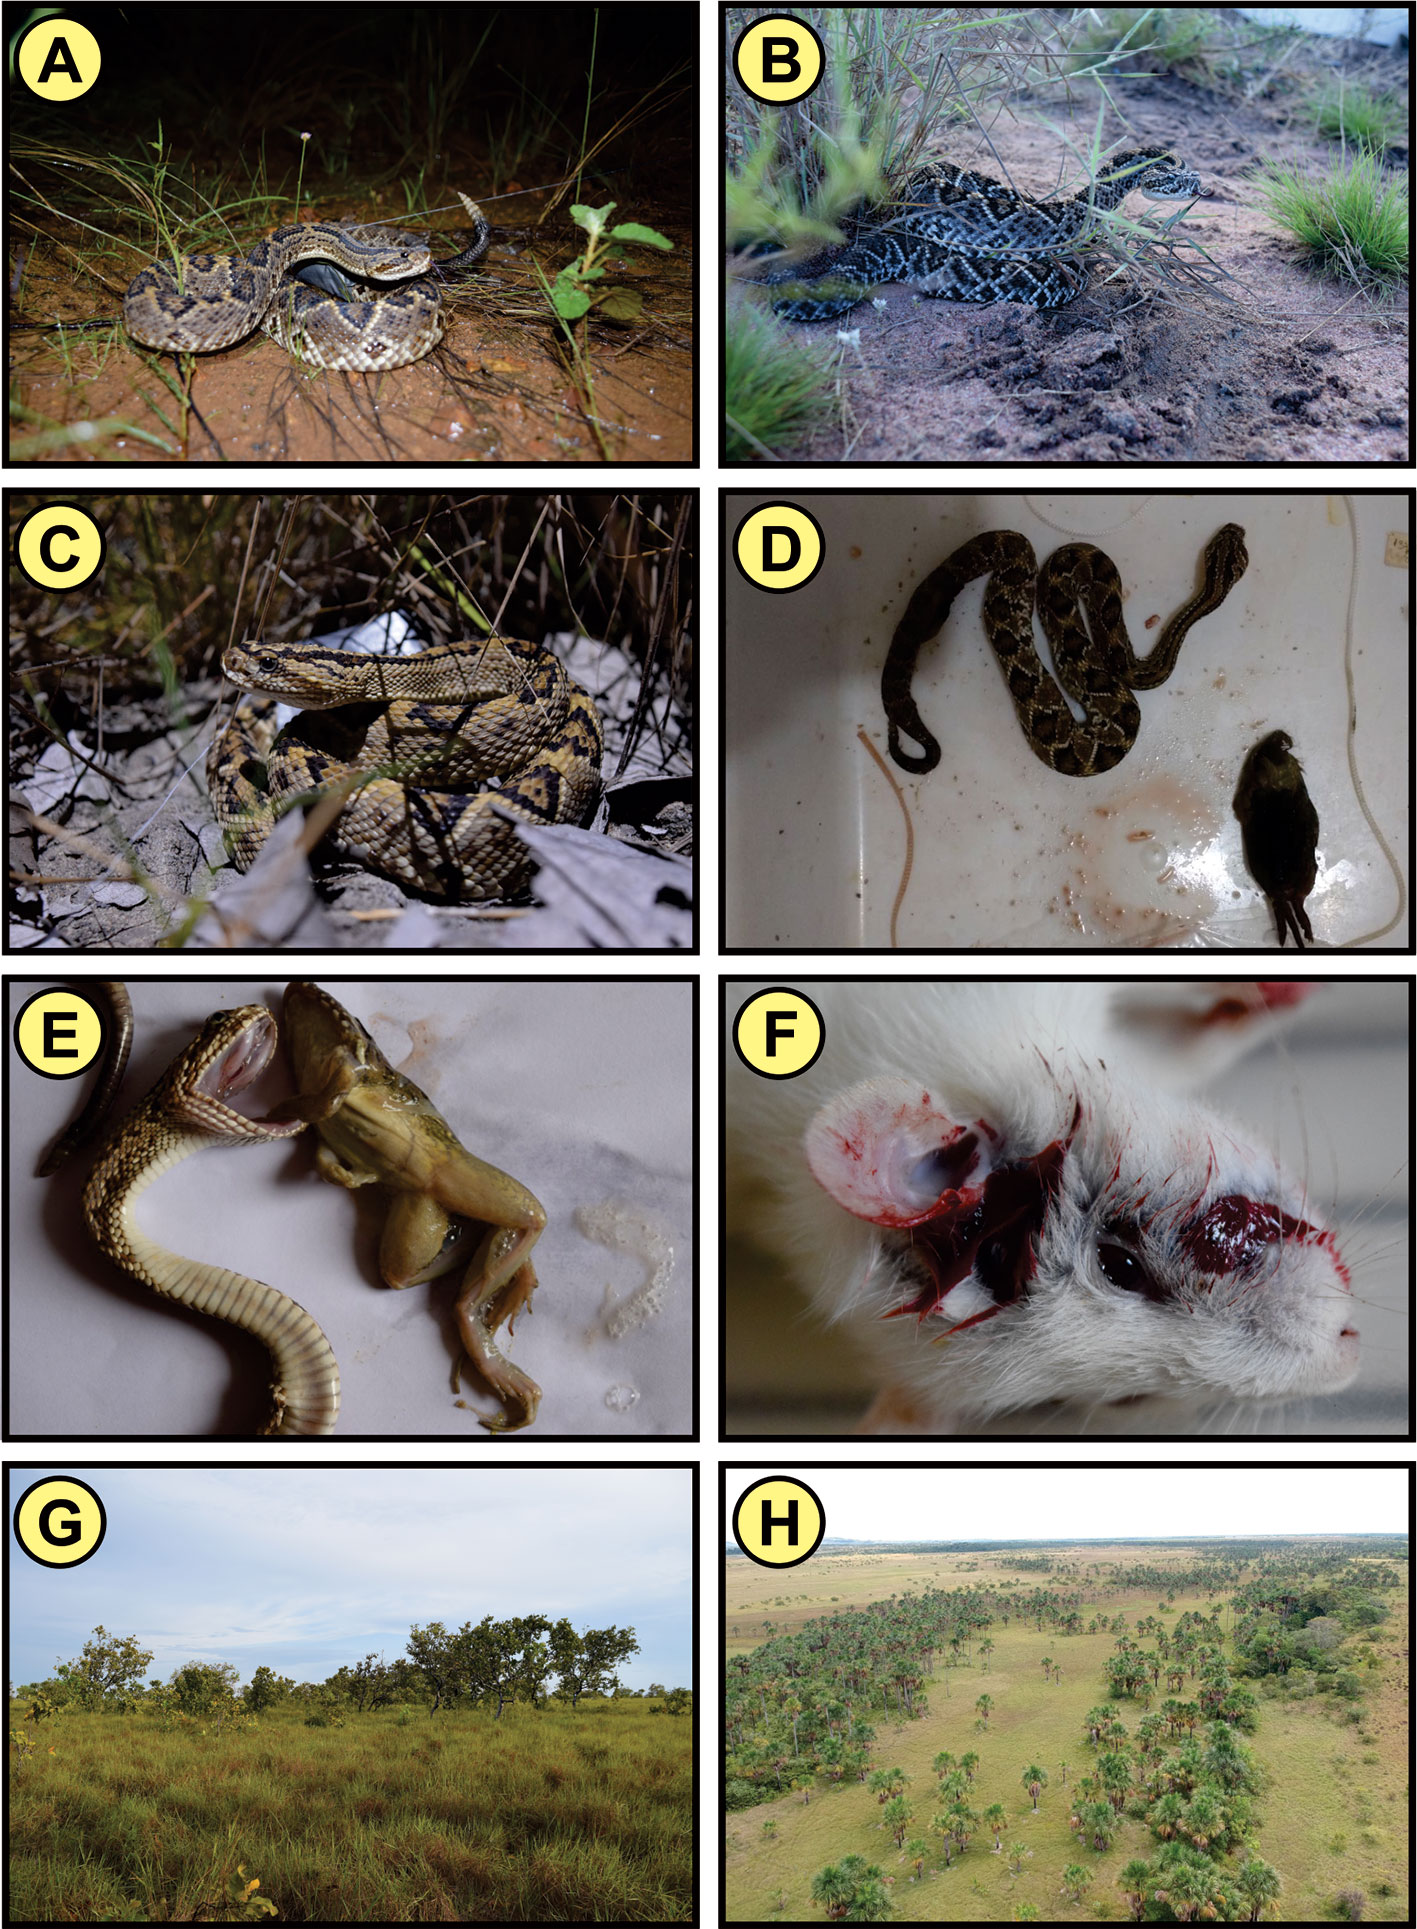 Frontiers Crotalus Durissus Ruruima Current Knowledge on Natural History, Medical Importance, and Clinical Toxinology pic